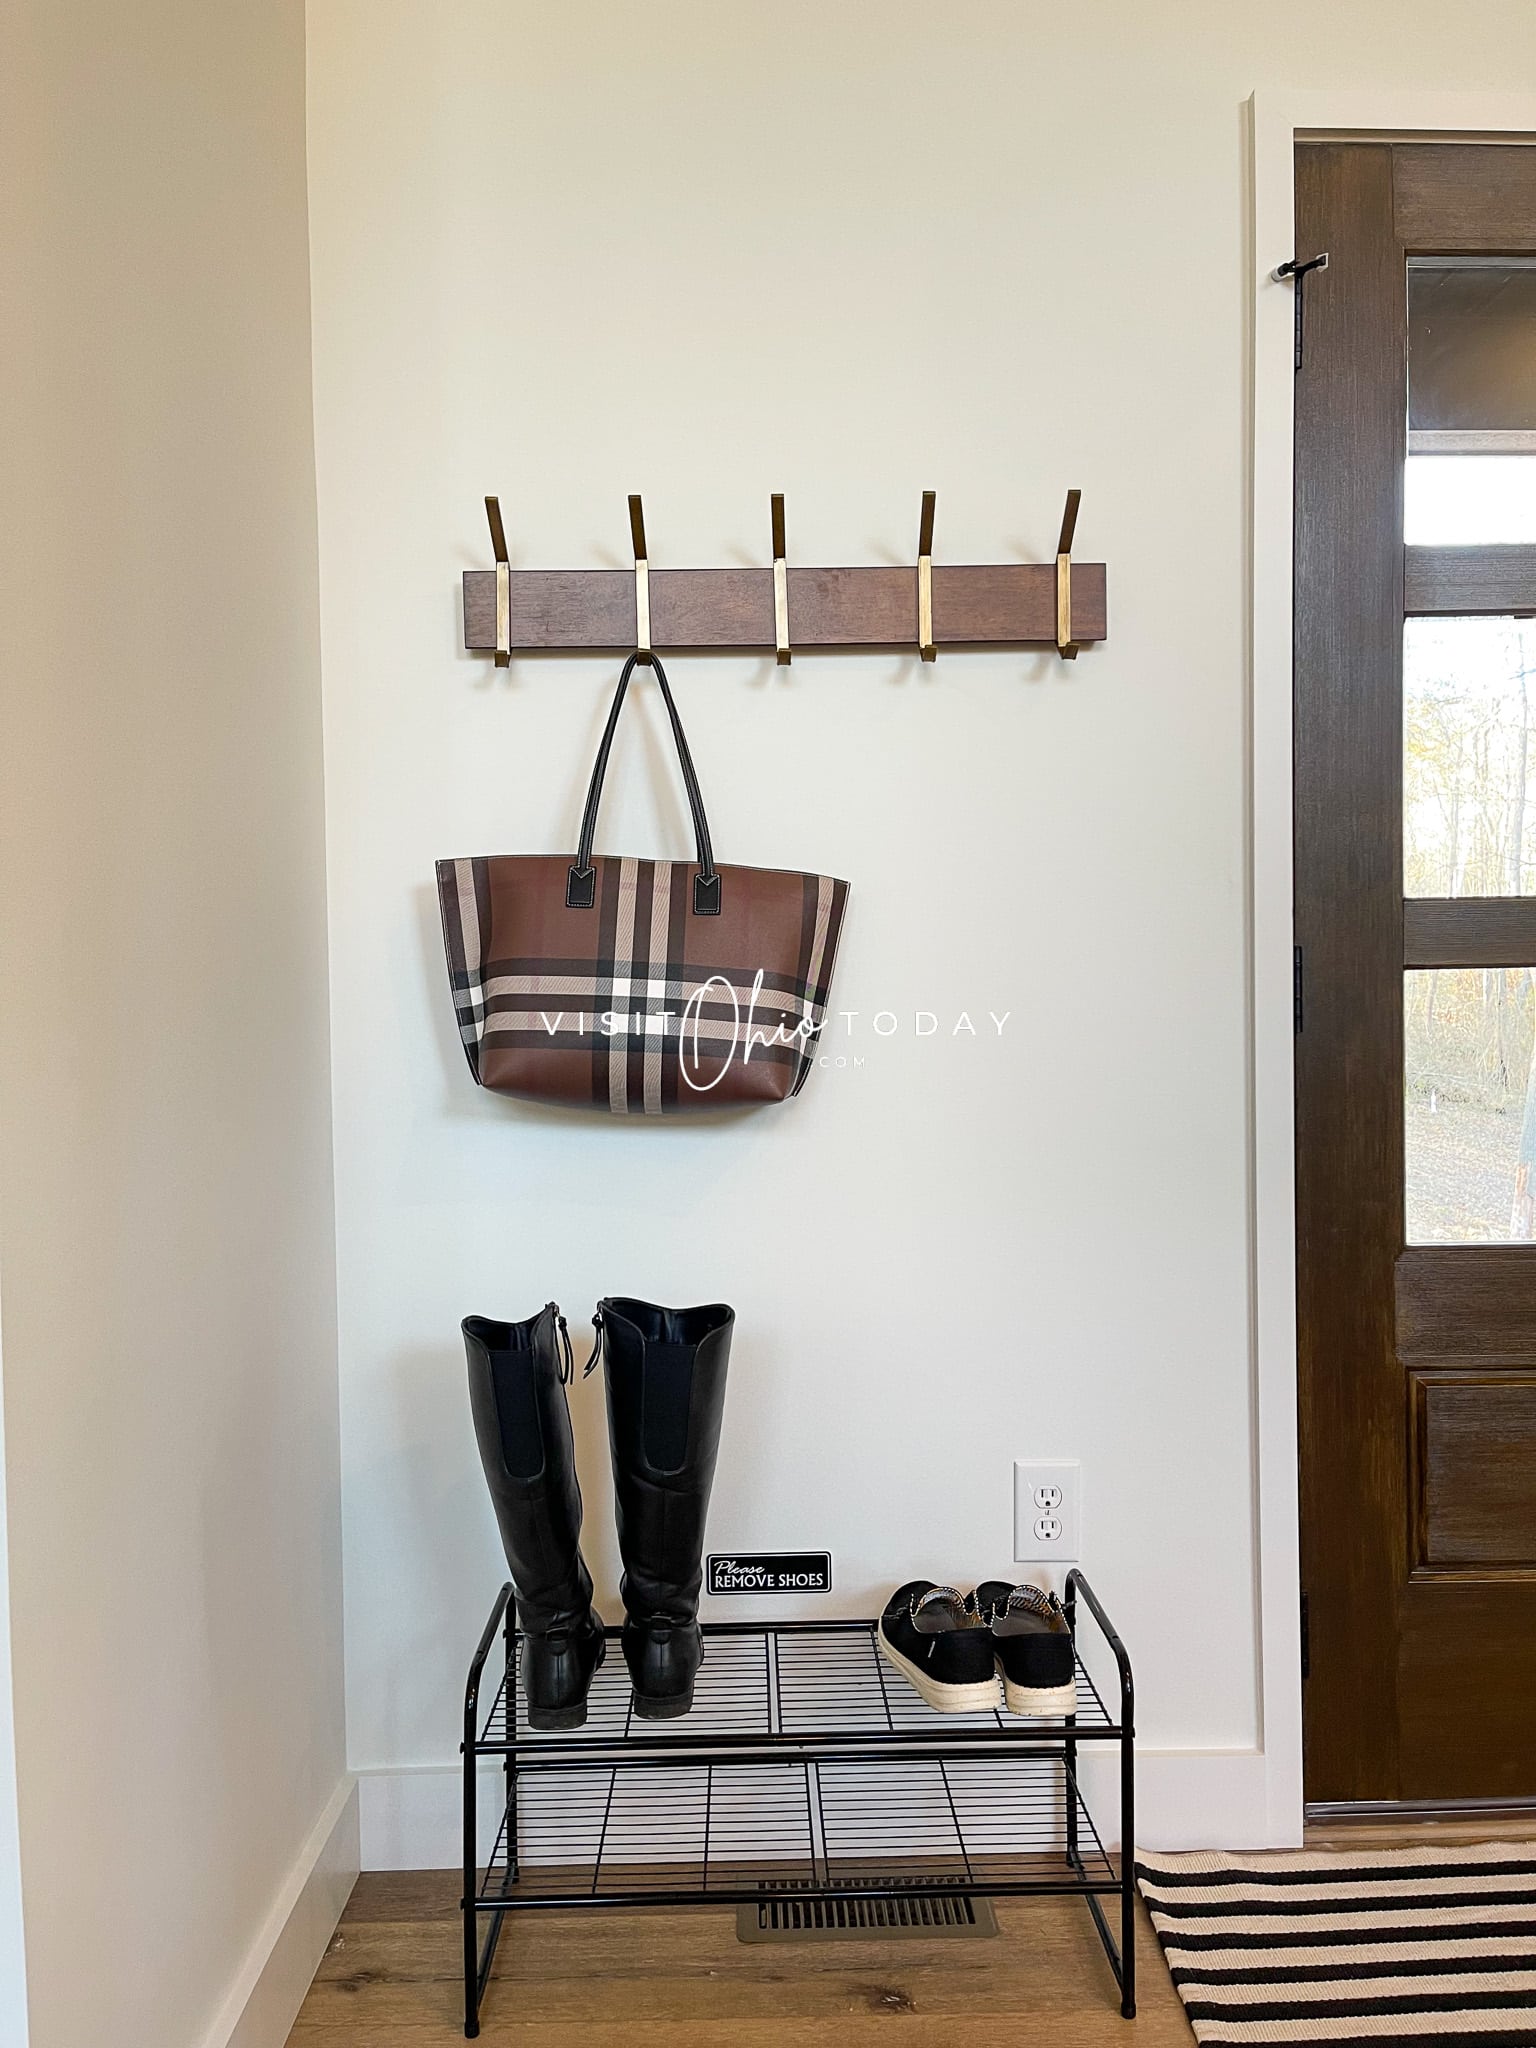 entry way of house with brown striped purse hanging on hook, boots and shoes on a shoe rack